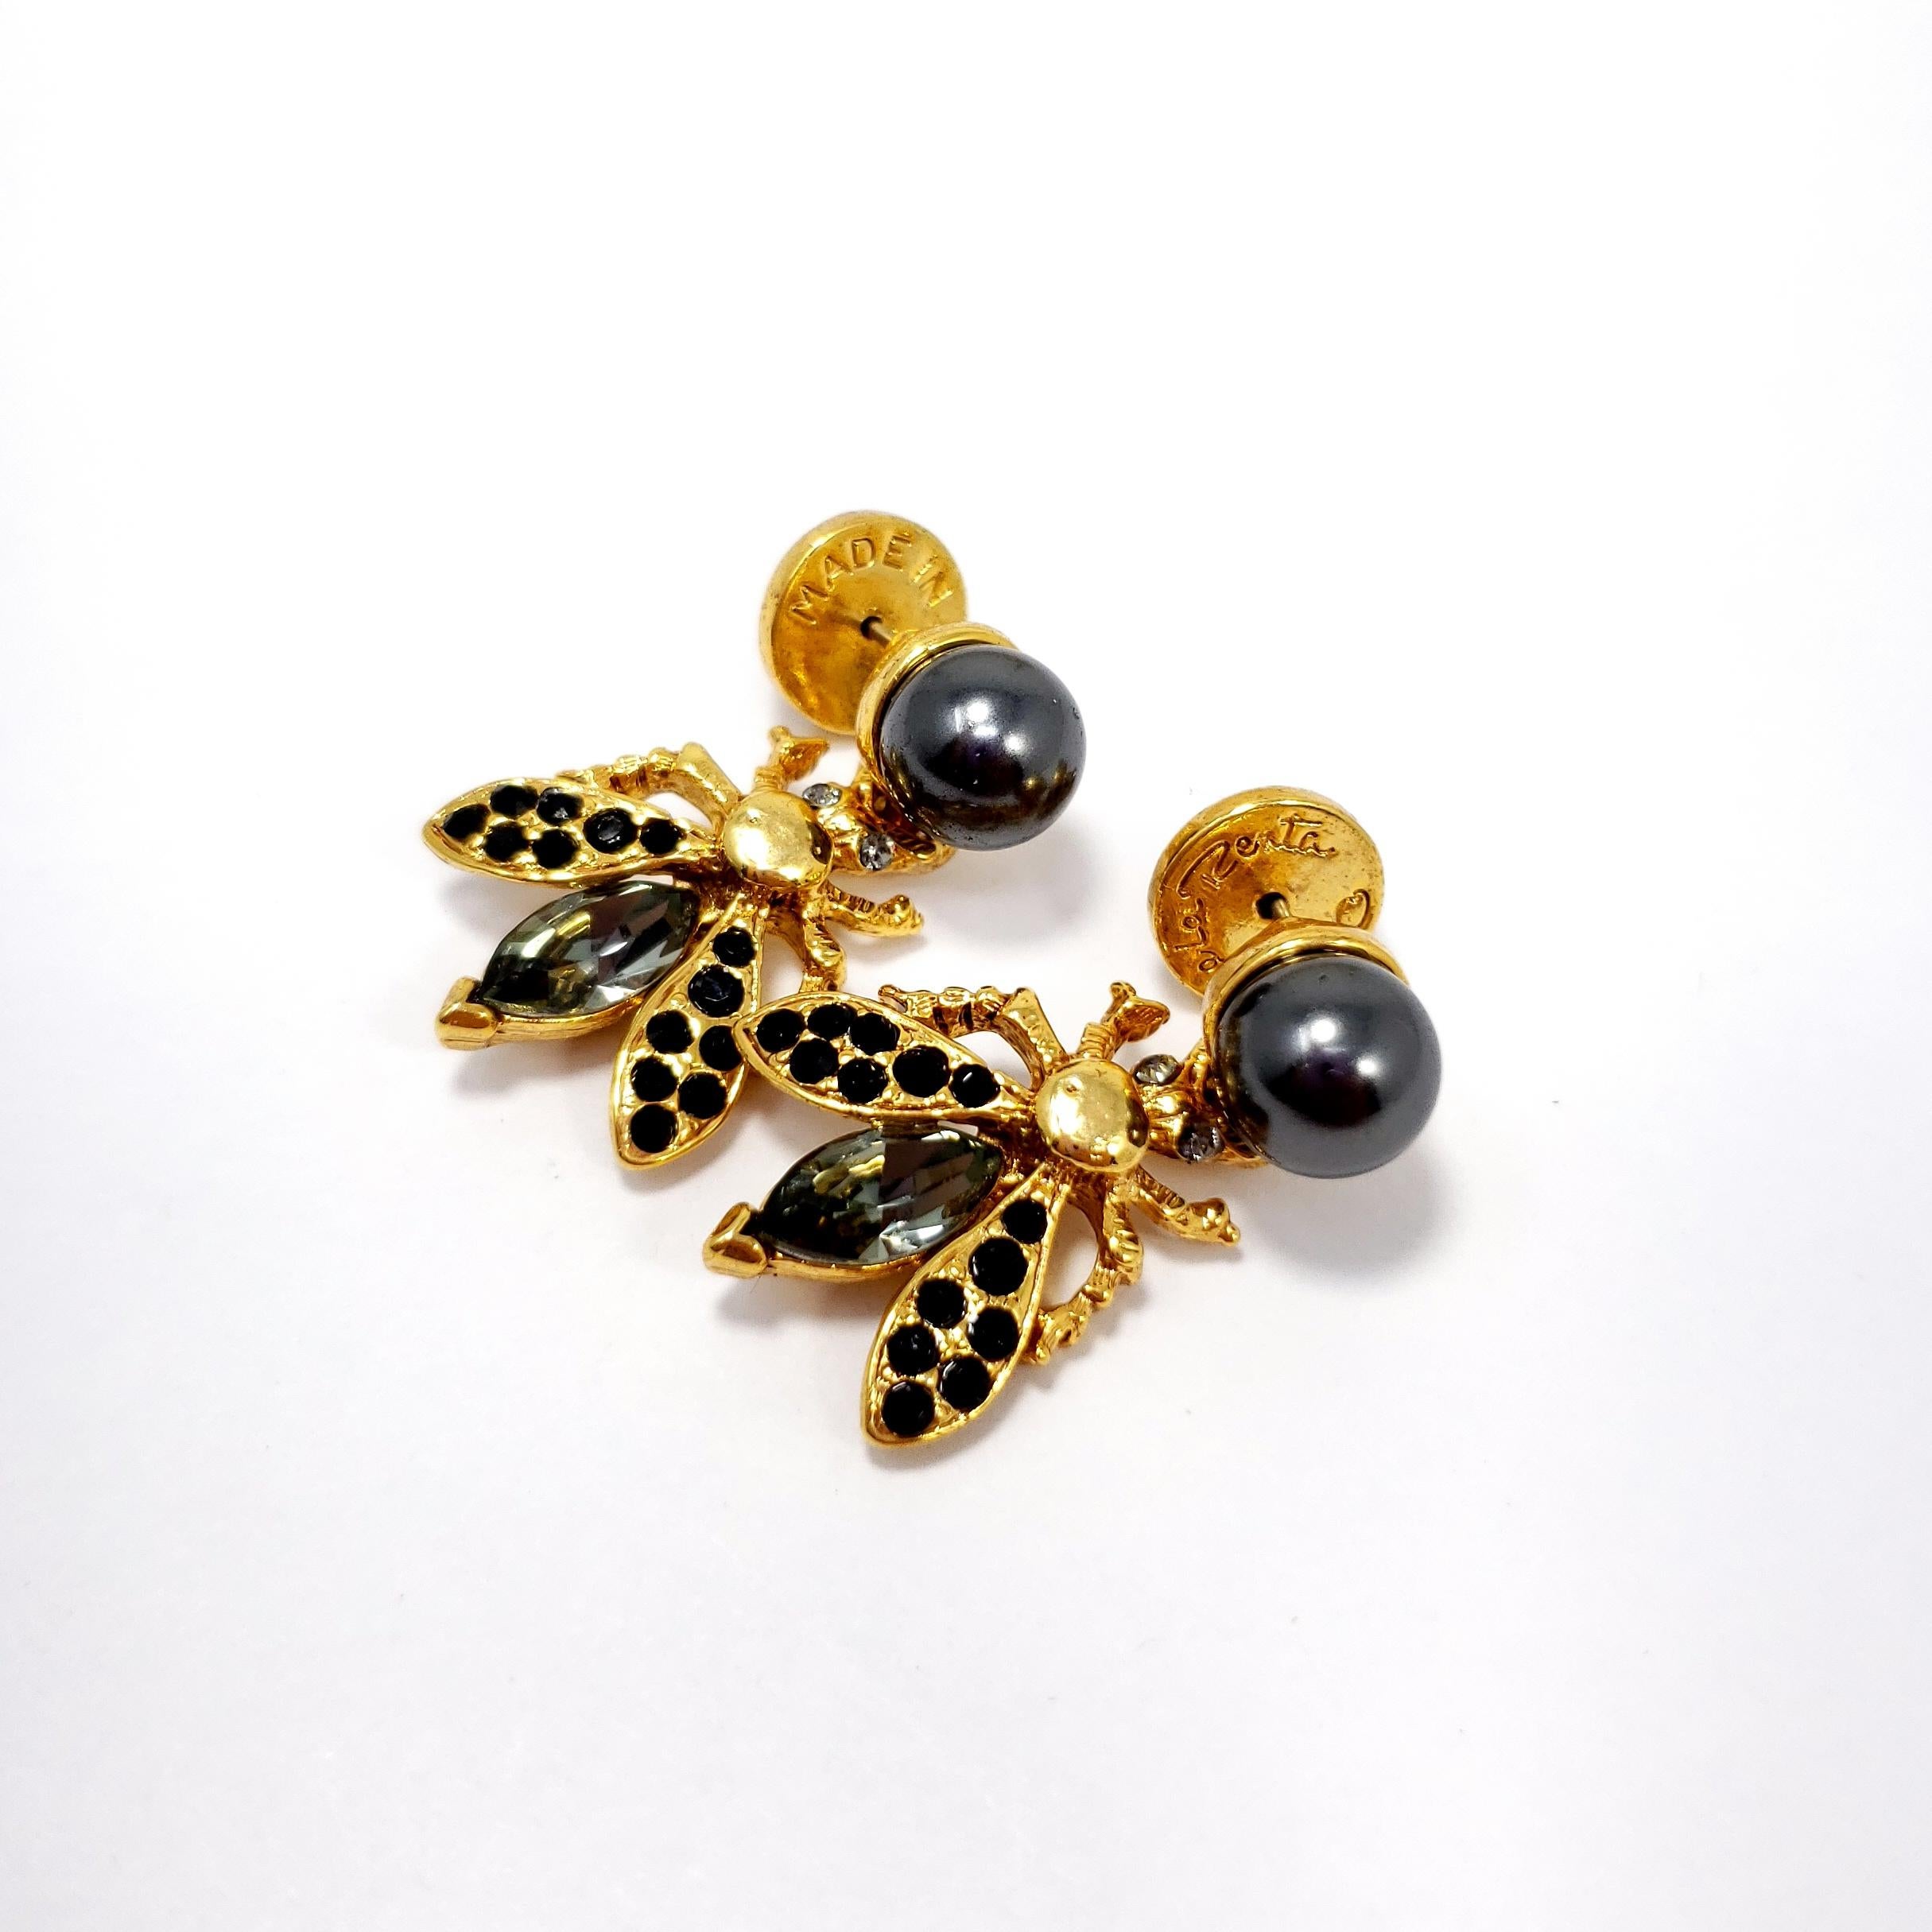 Lavish pair of earrings from Oscar de la Renta. A fly accented with black and grey crystals hang off a faux Tahitian pearl. Gold plated.

Hallmarks: Oscar de la Renta, Made in USA